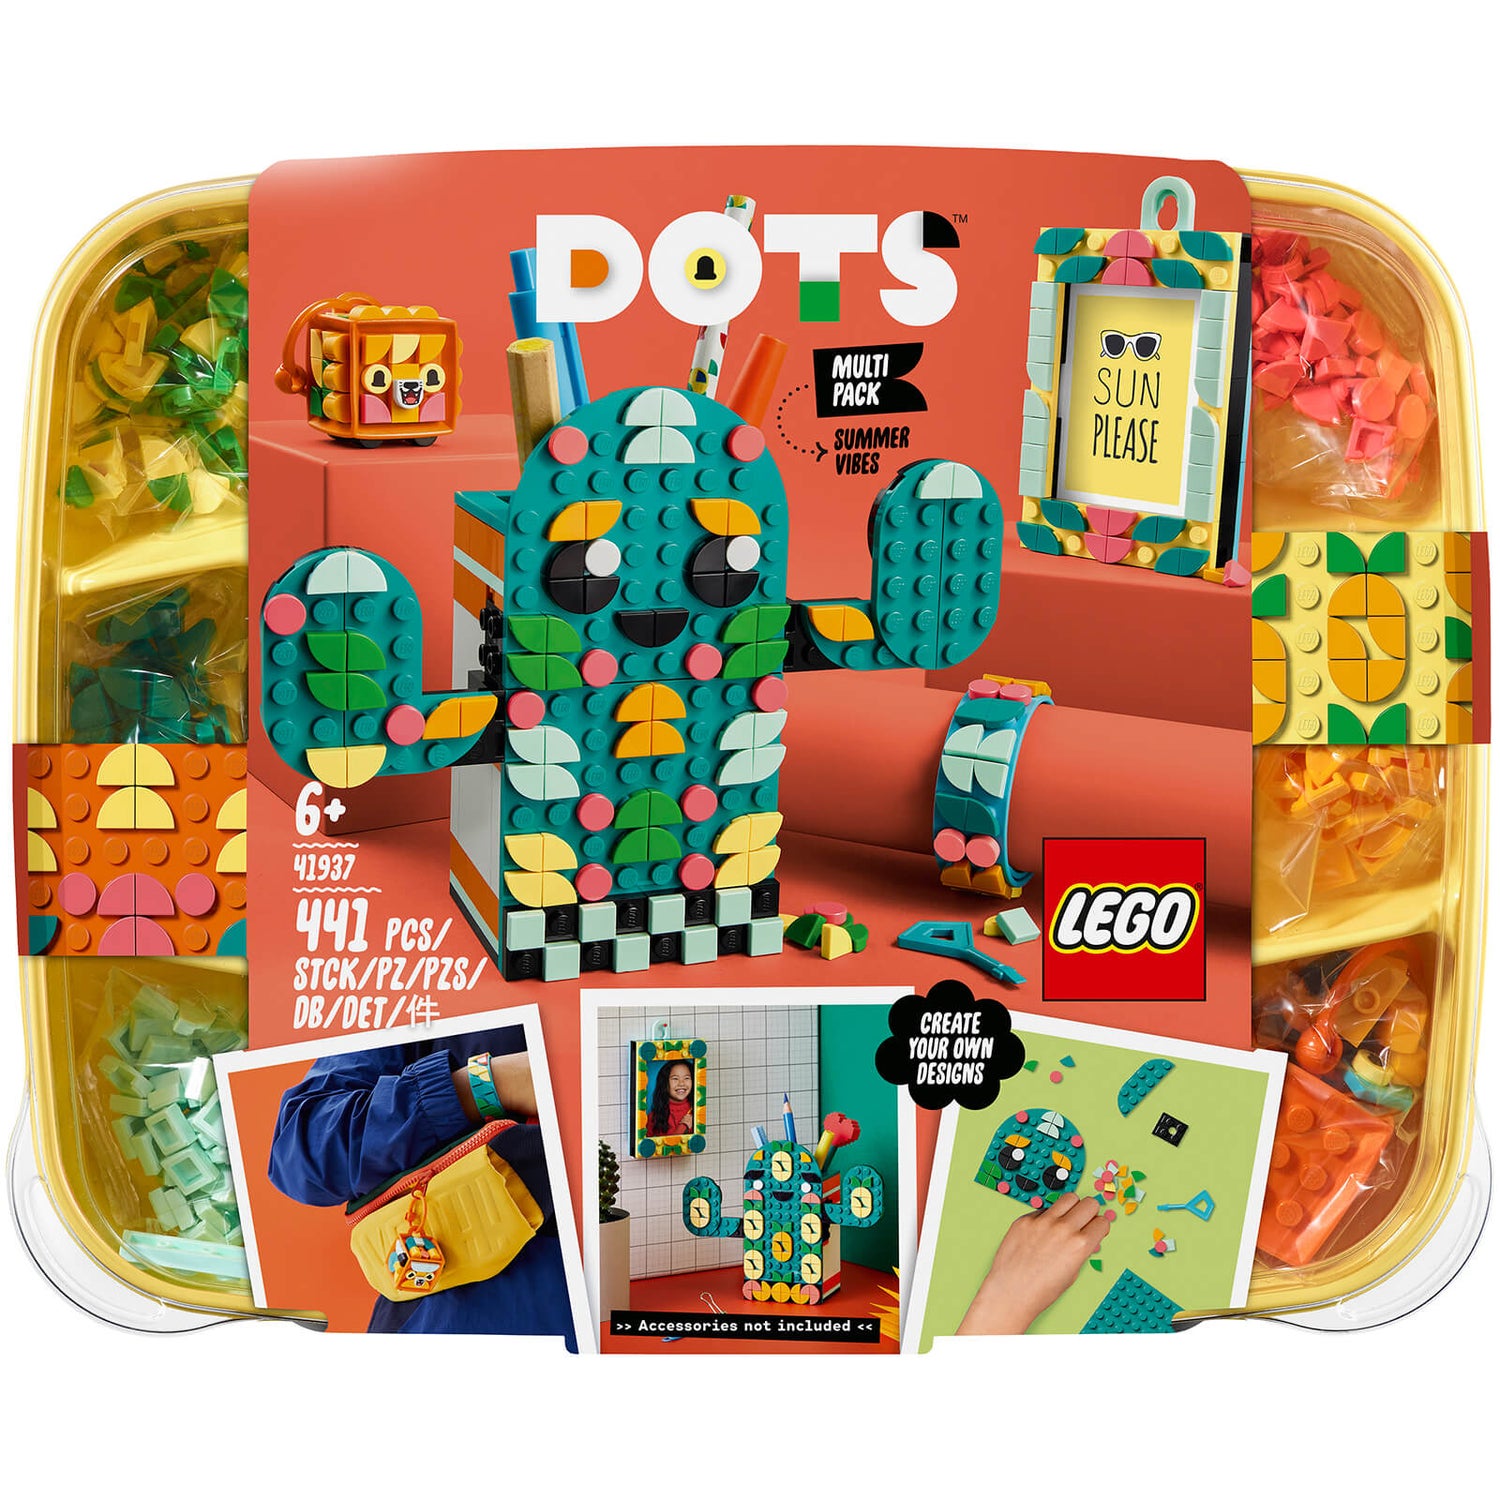 LEGO DOTS: Multi Pack – Summer Vibes 4in1 Craft Set (41937)